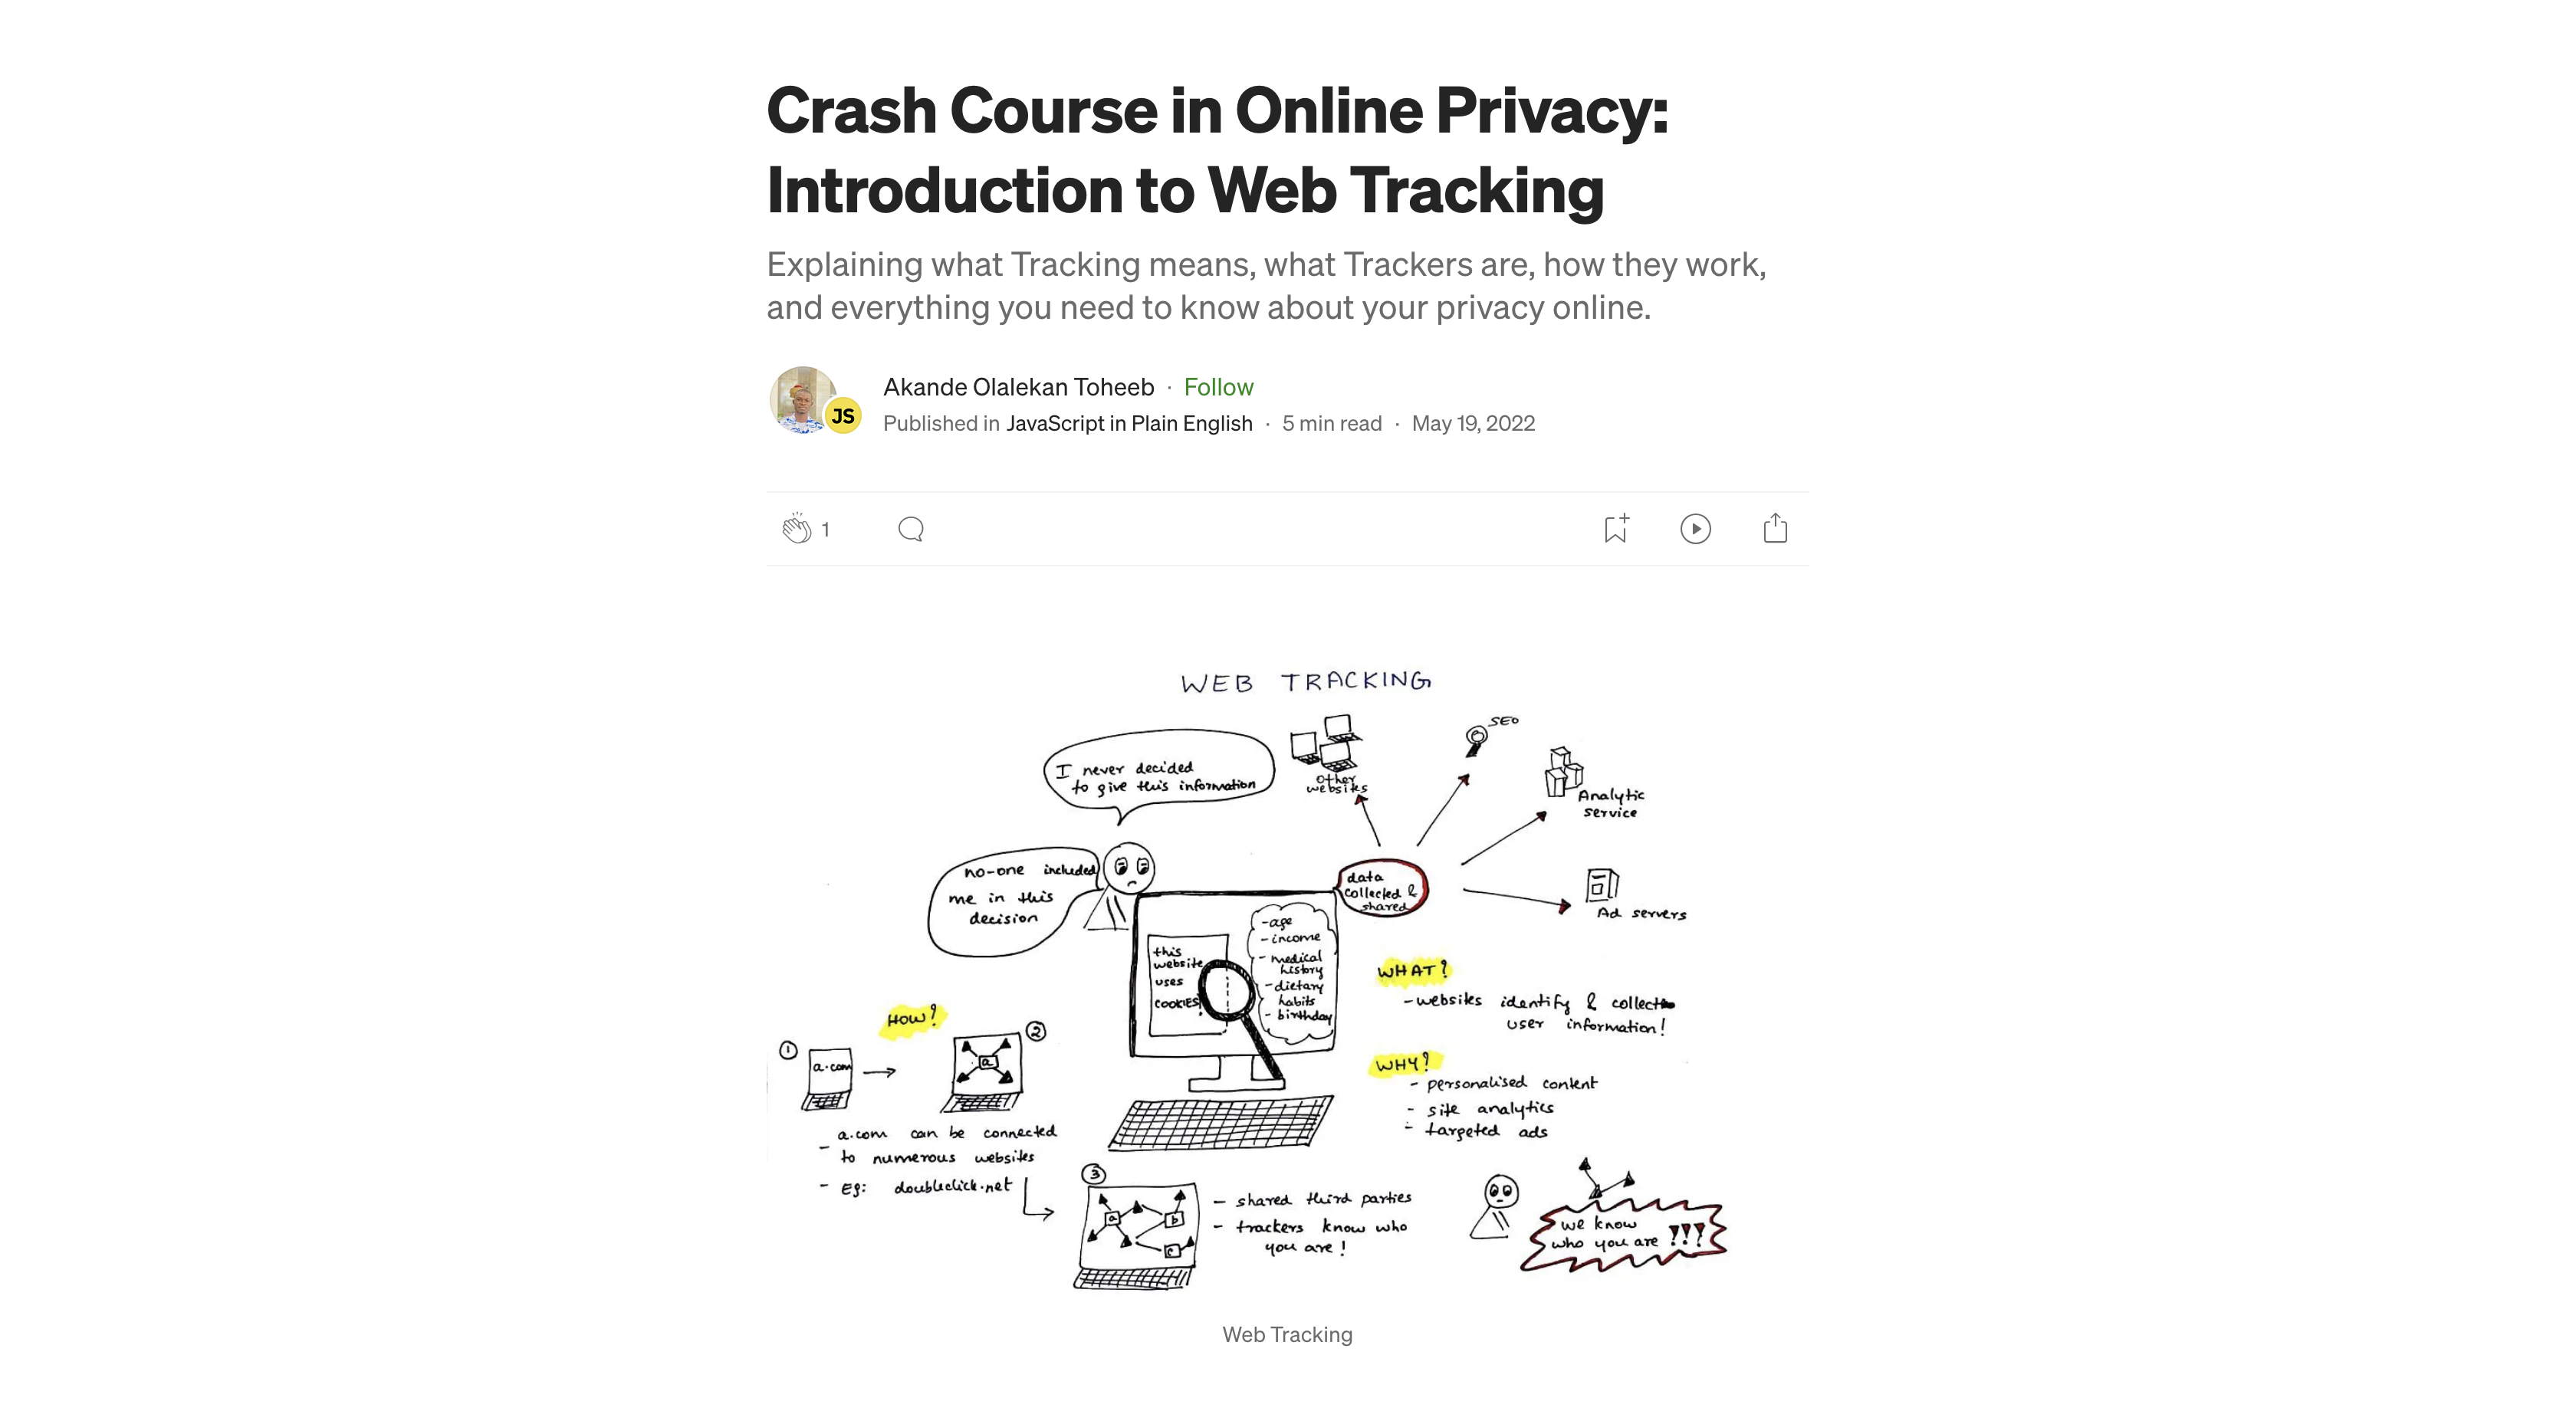 Crash Course in Online Privacy: Introduction to Web Tracking